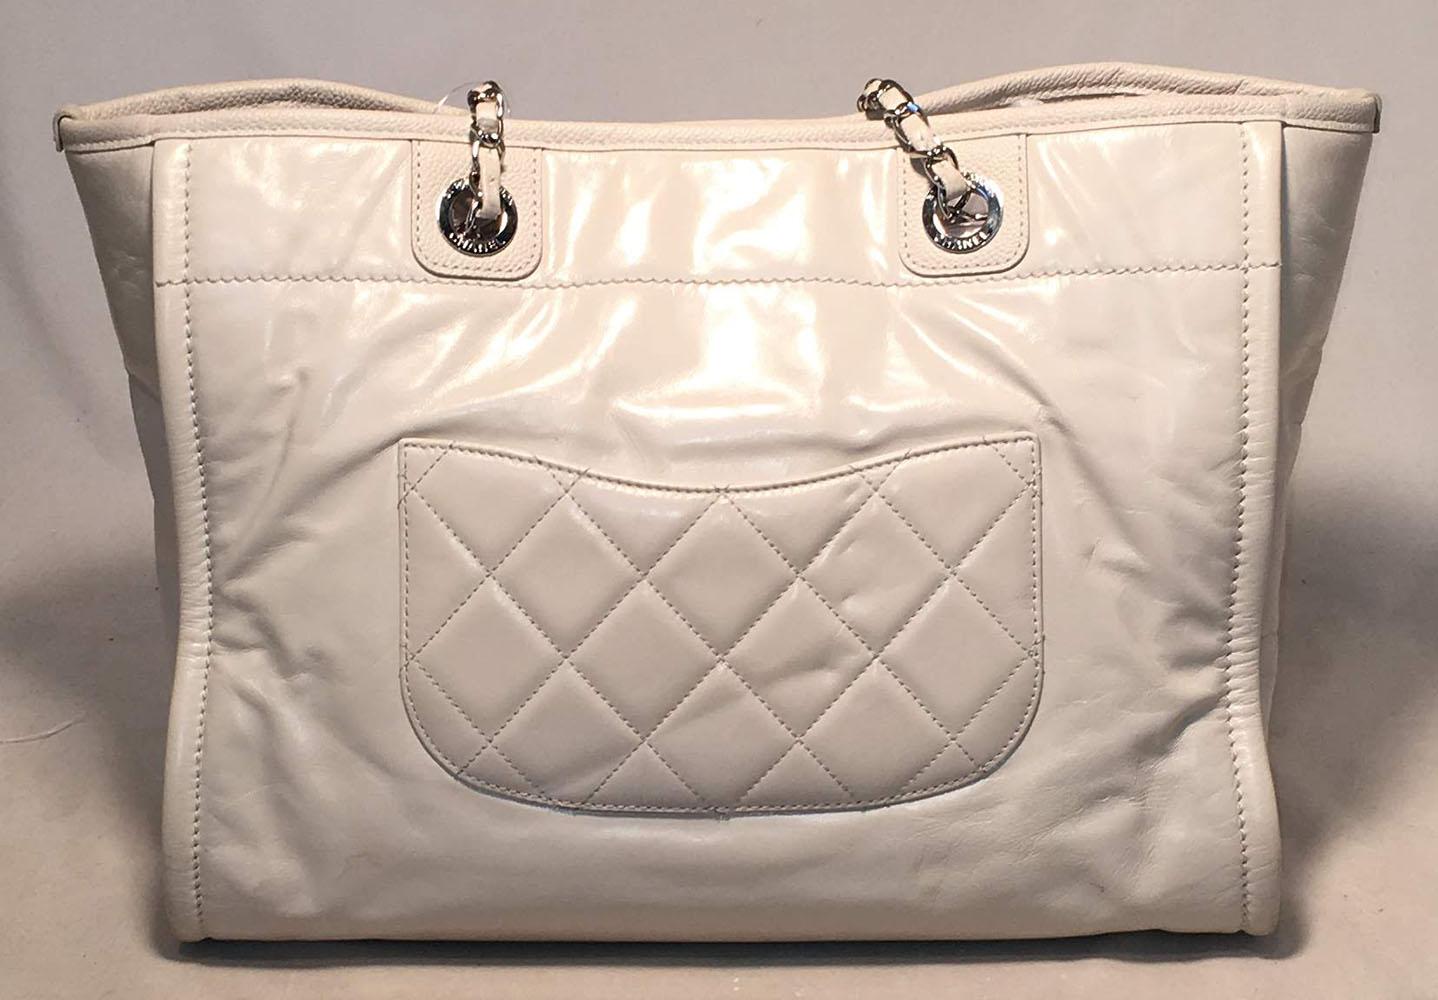 Women's Chanel White Glazed Leather Deauville Shopping Bag Tote